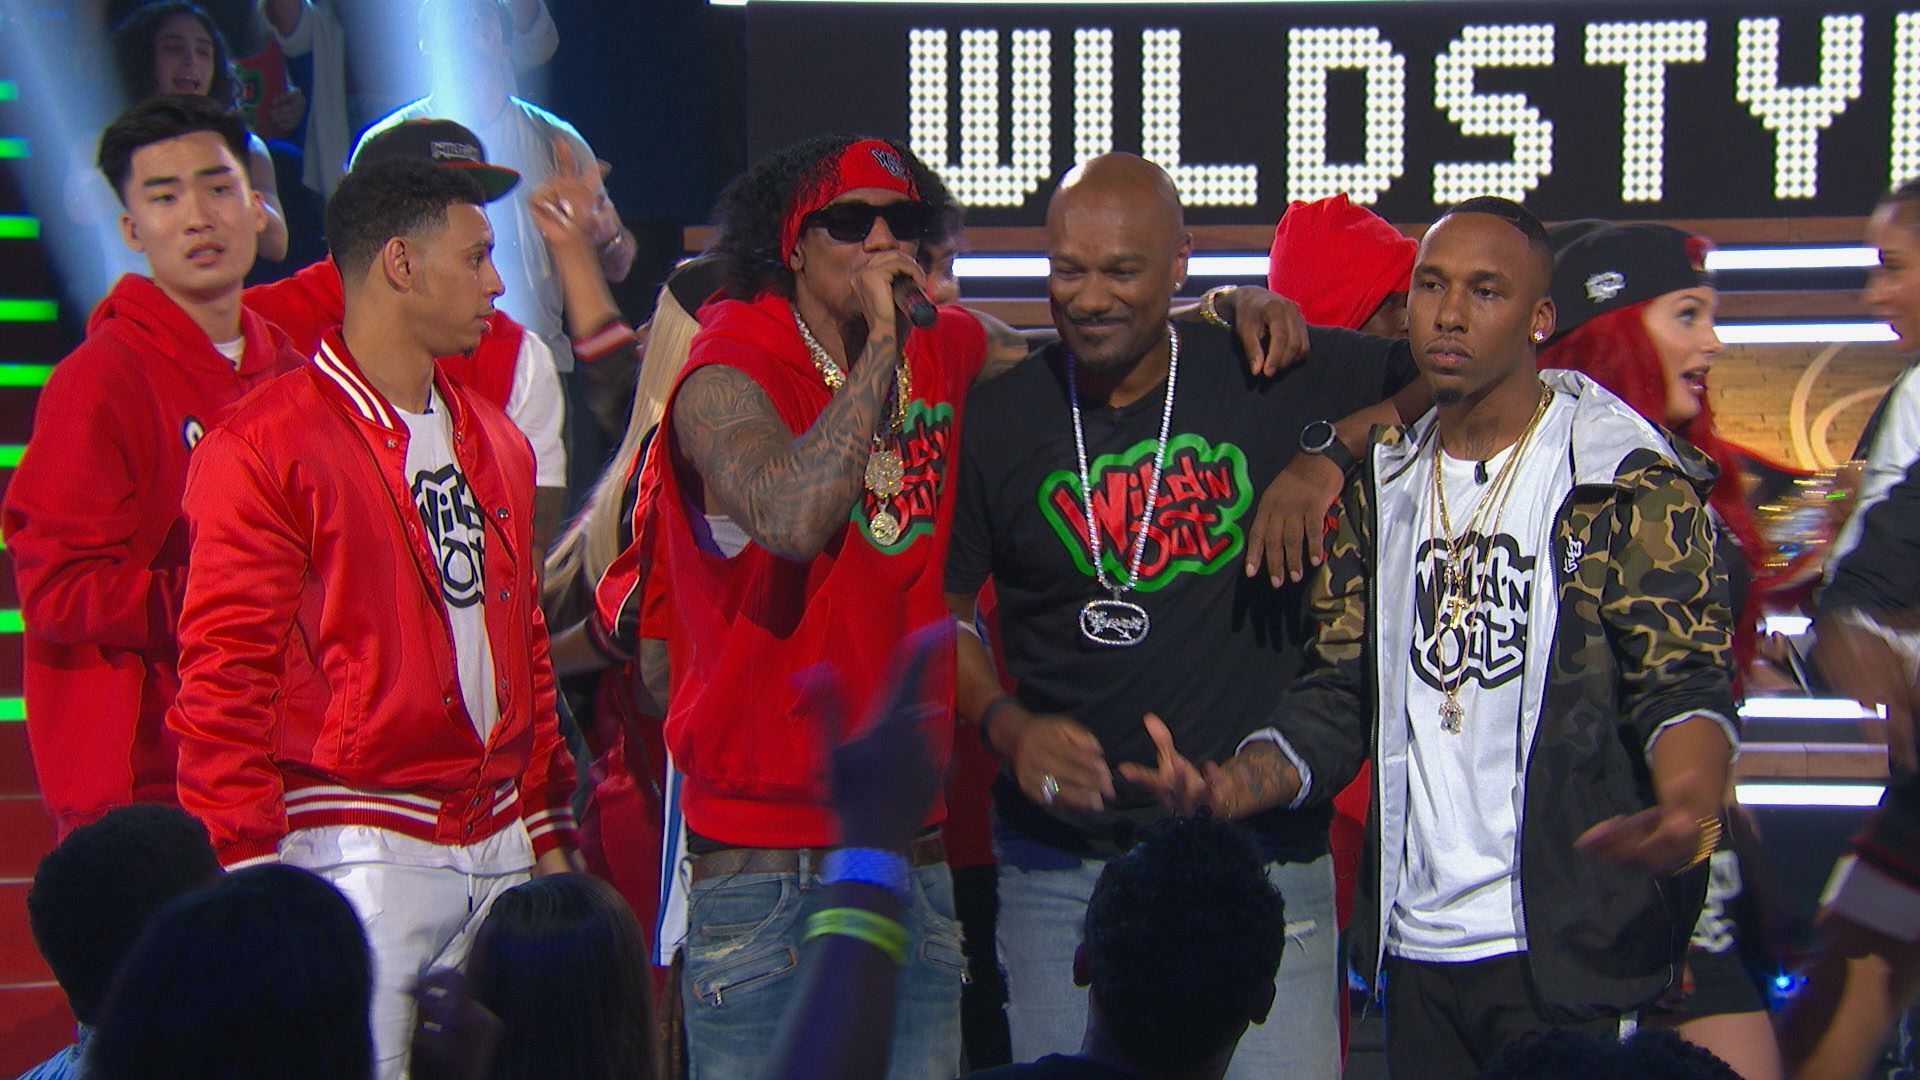 Is wild n out on hulu